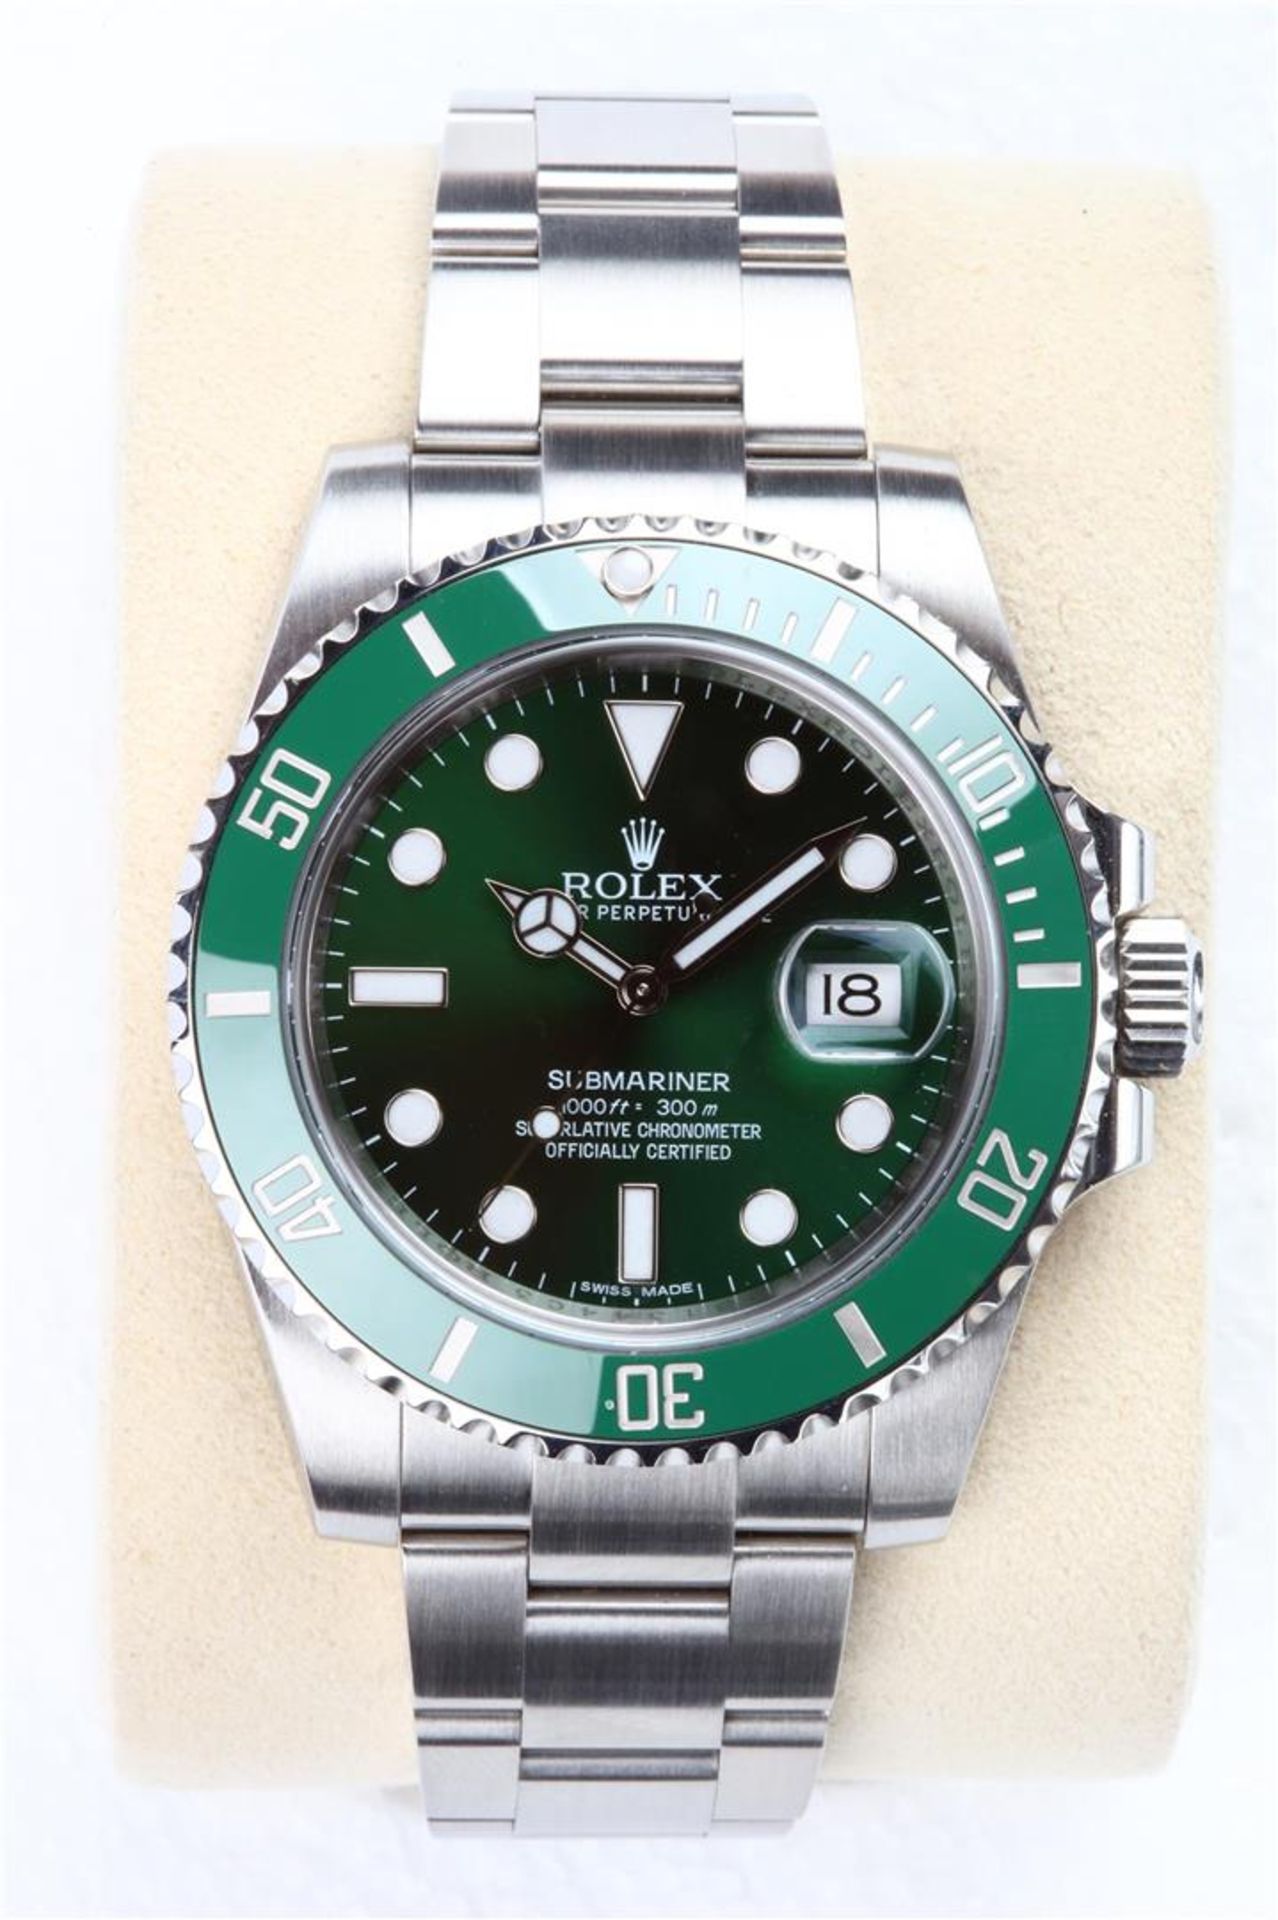 No VAT Gents Rolex Oyster Perpetual Date Submariner "Hulk" Watch - Comes With Inner And Outer Boxes